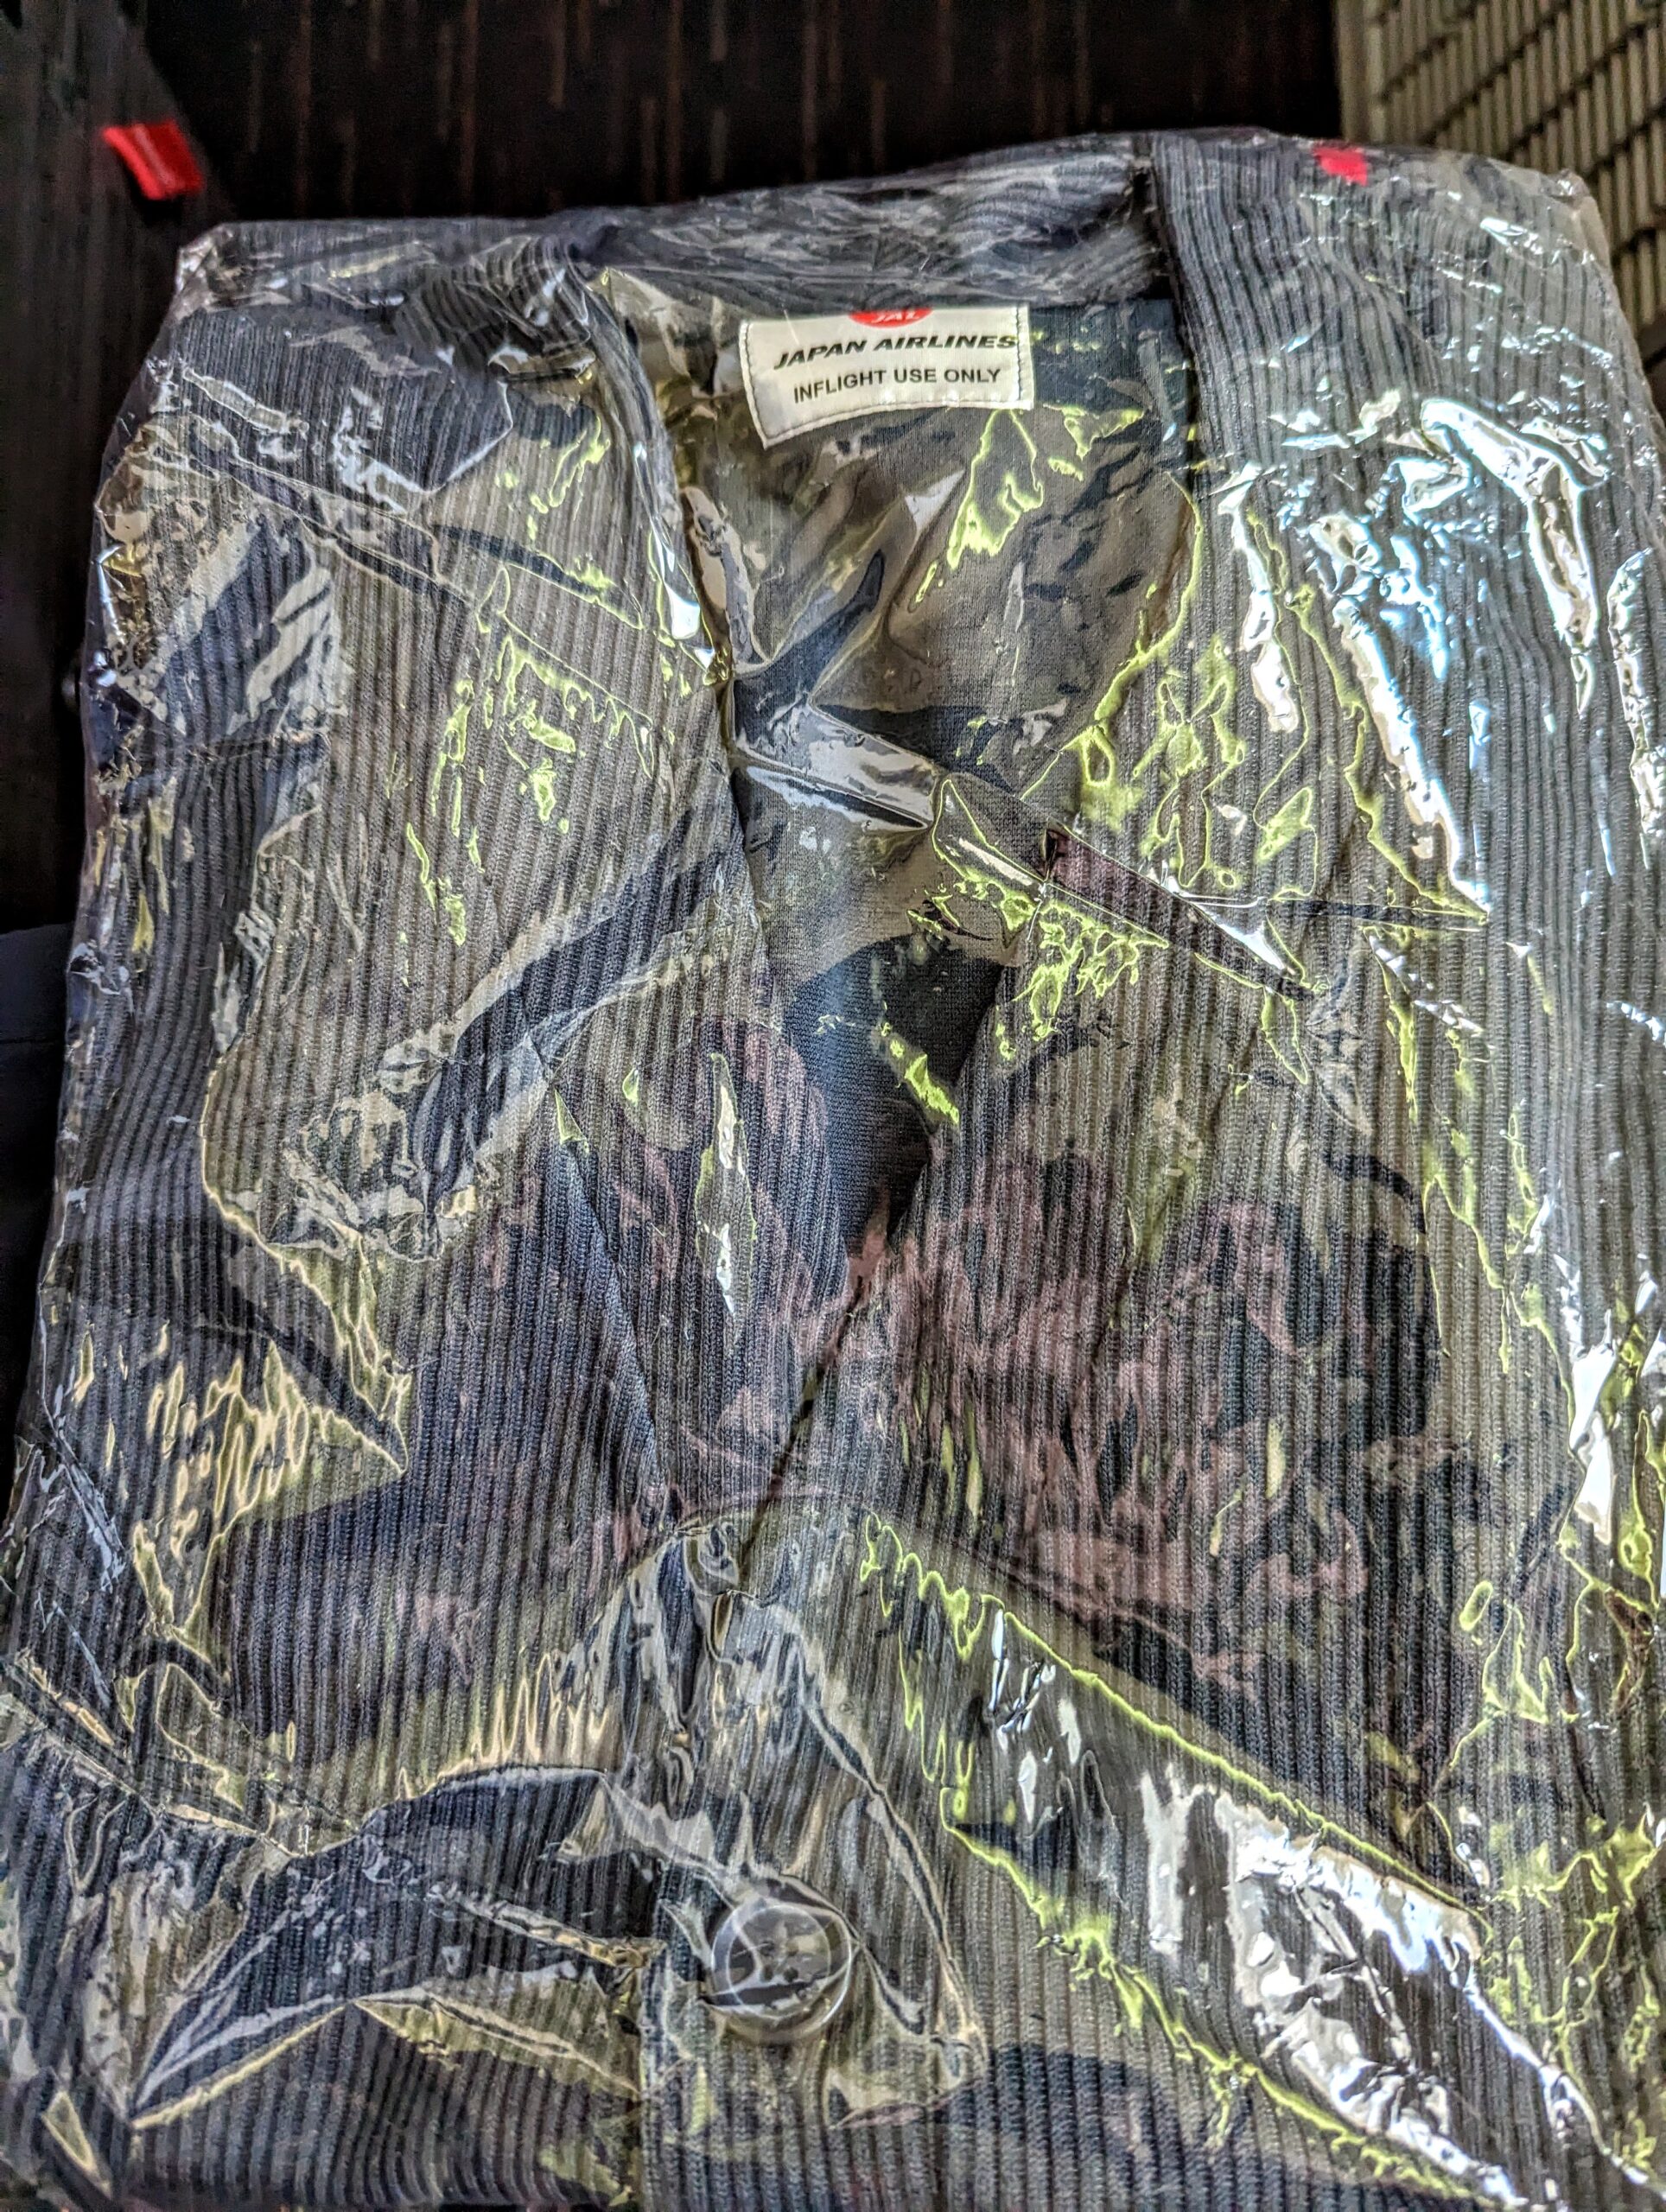 a jacket in a plastic bag